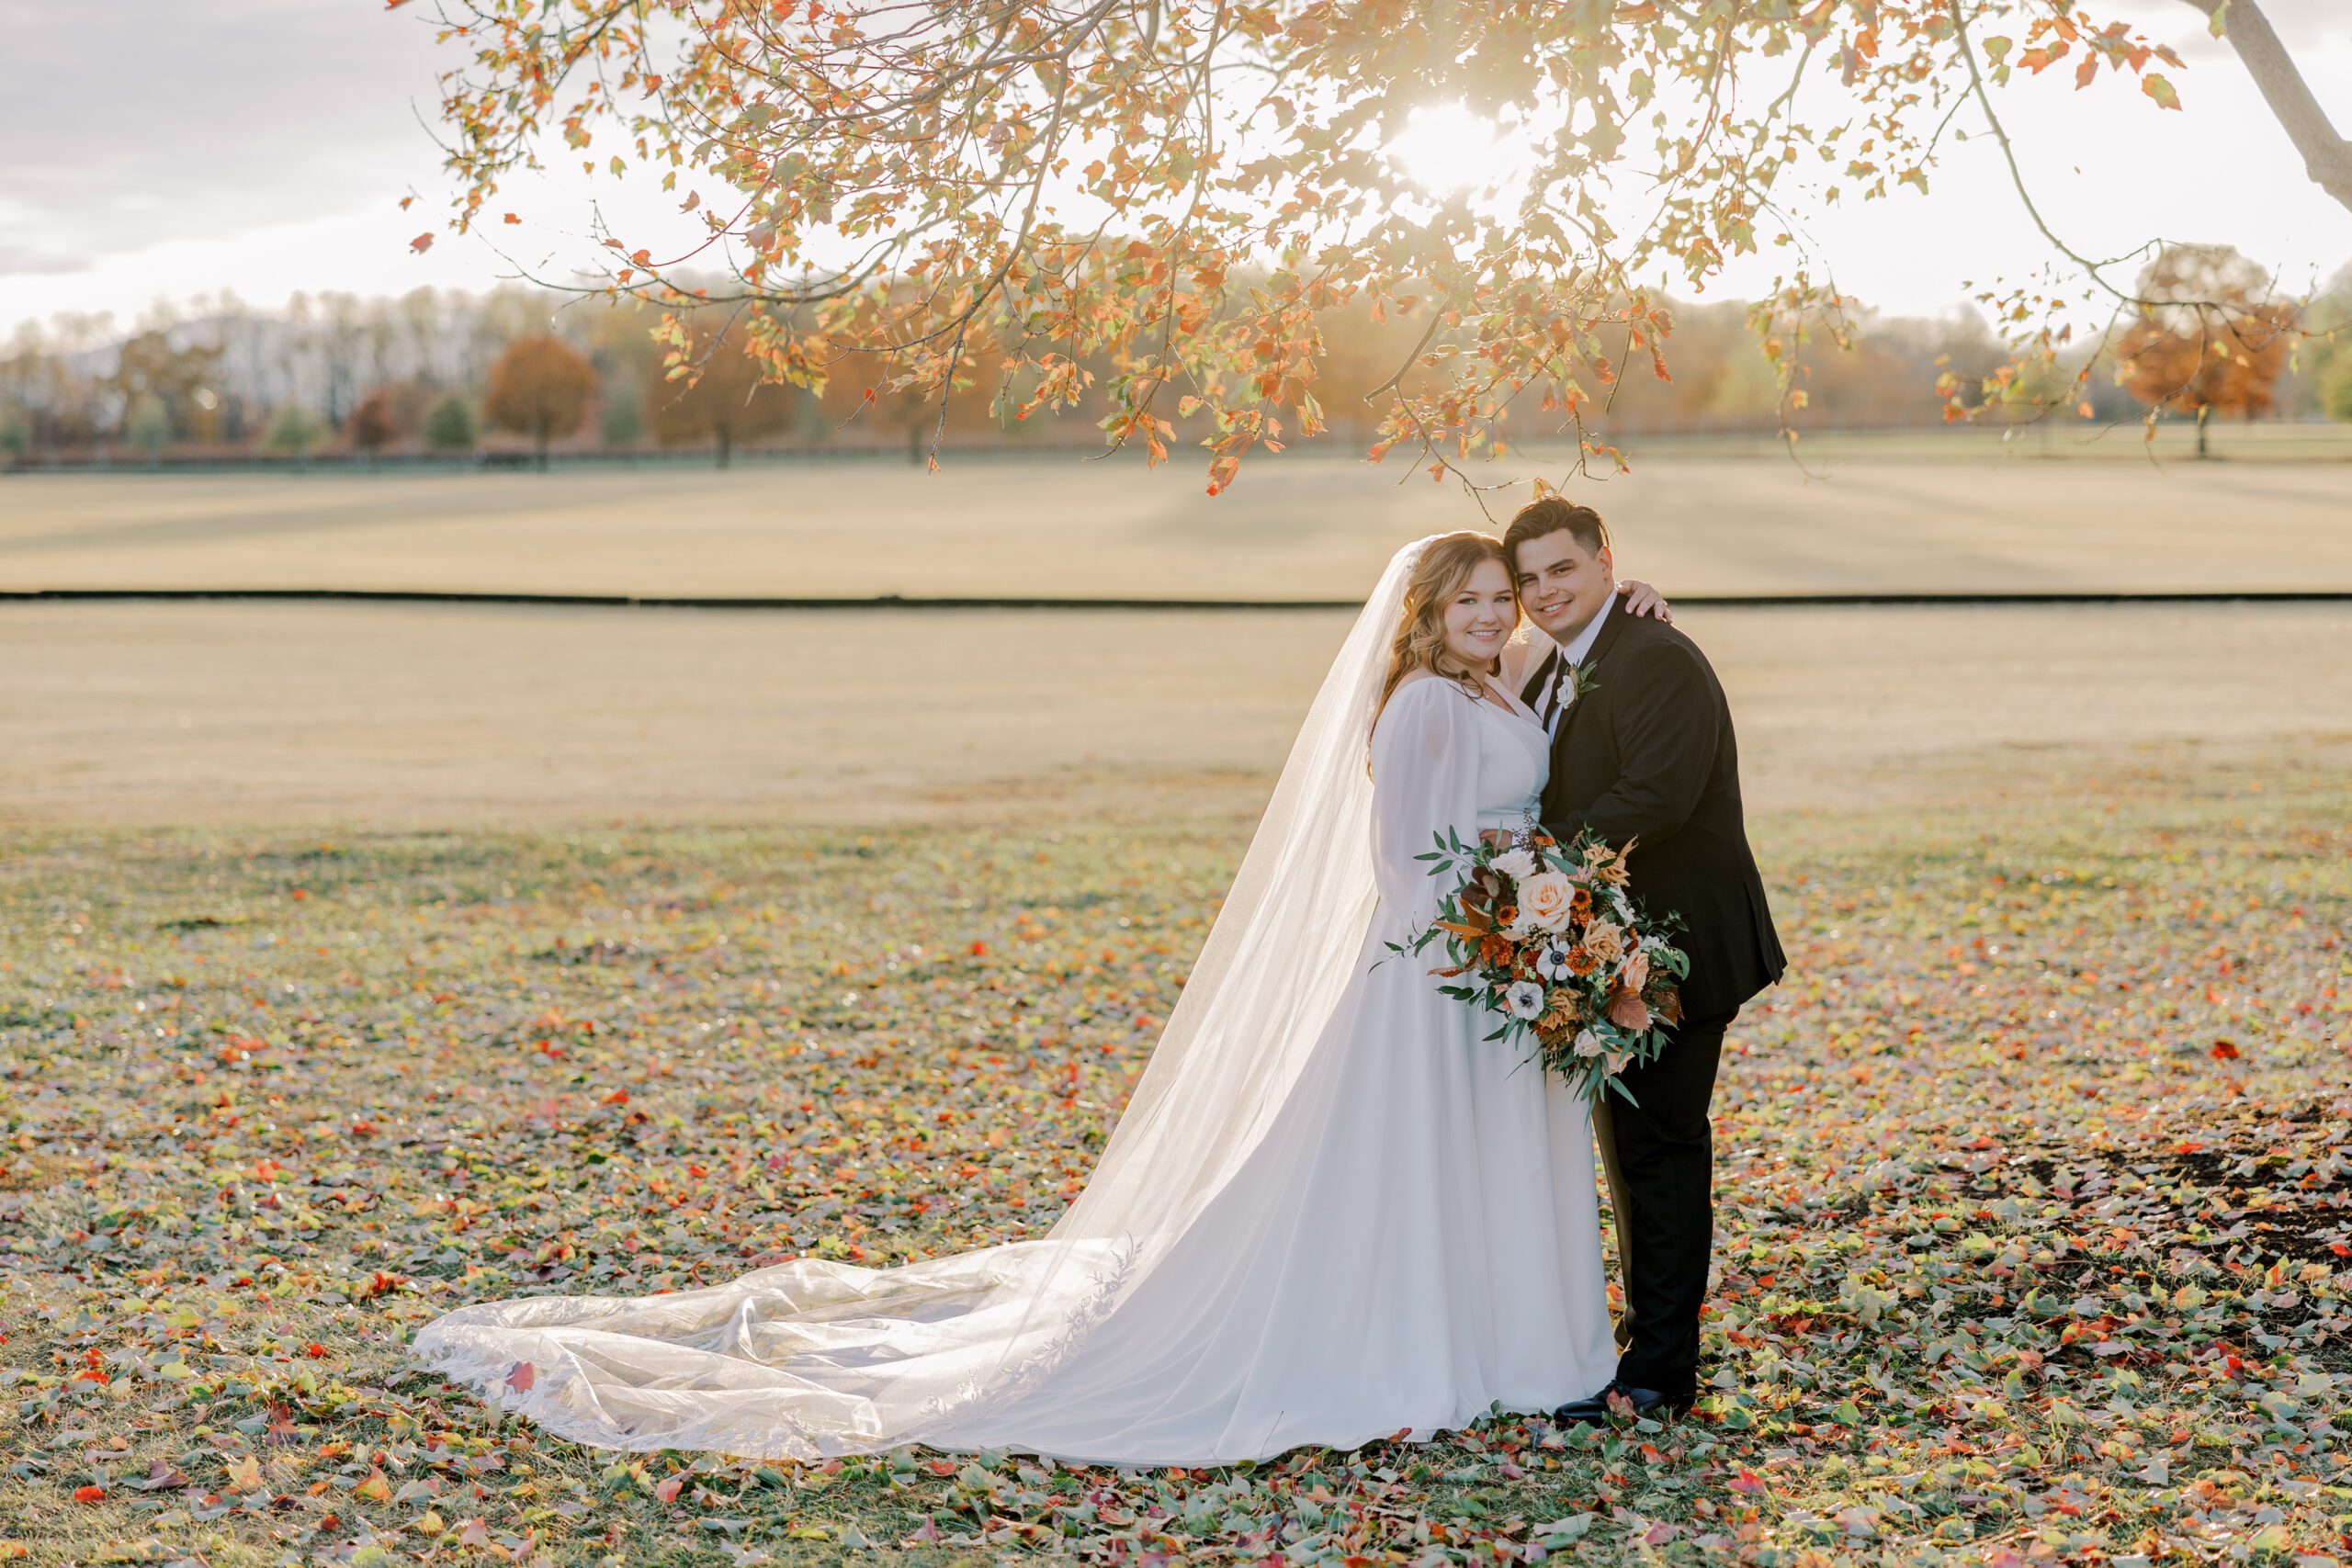 Bride and groom both smiling at camera standing under a tree with orange leaves as the sun begins to set